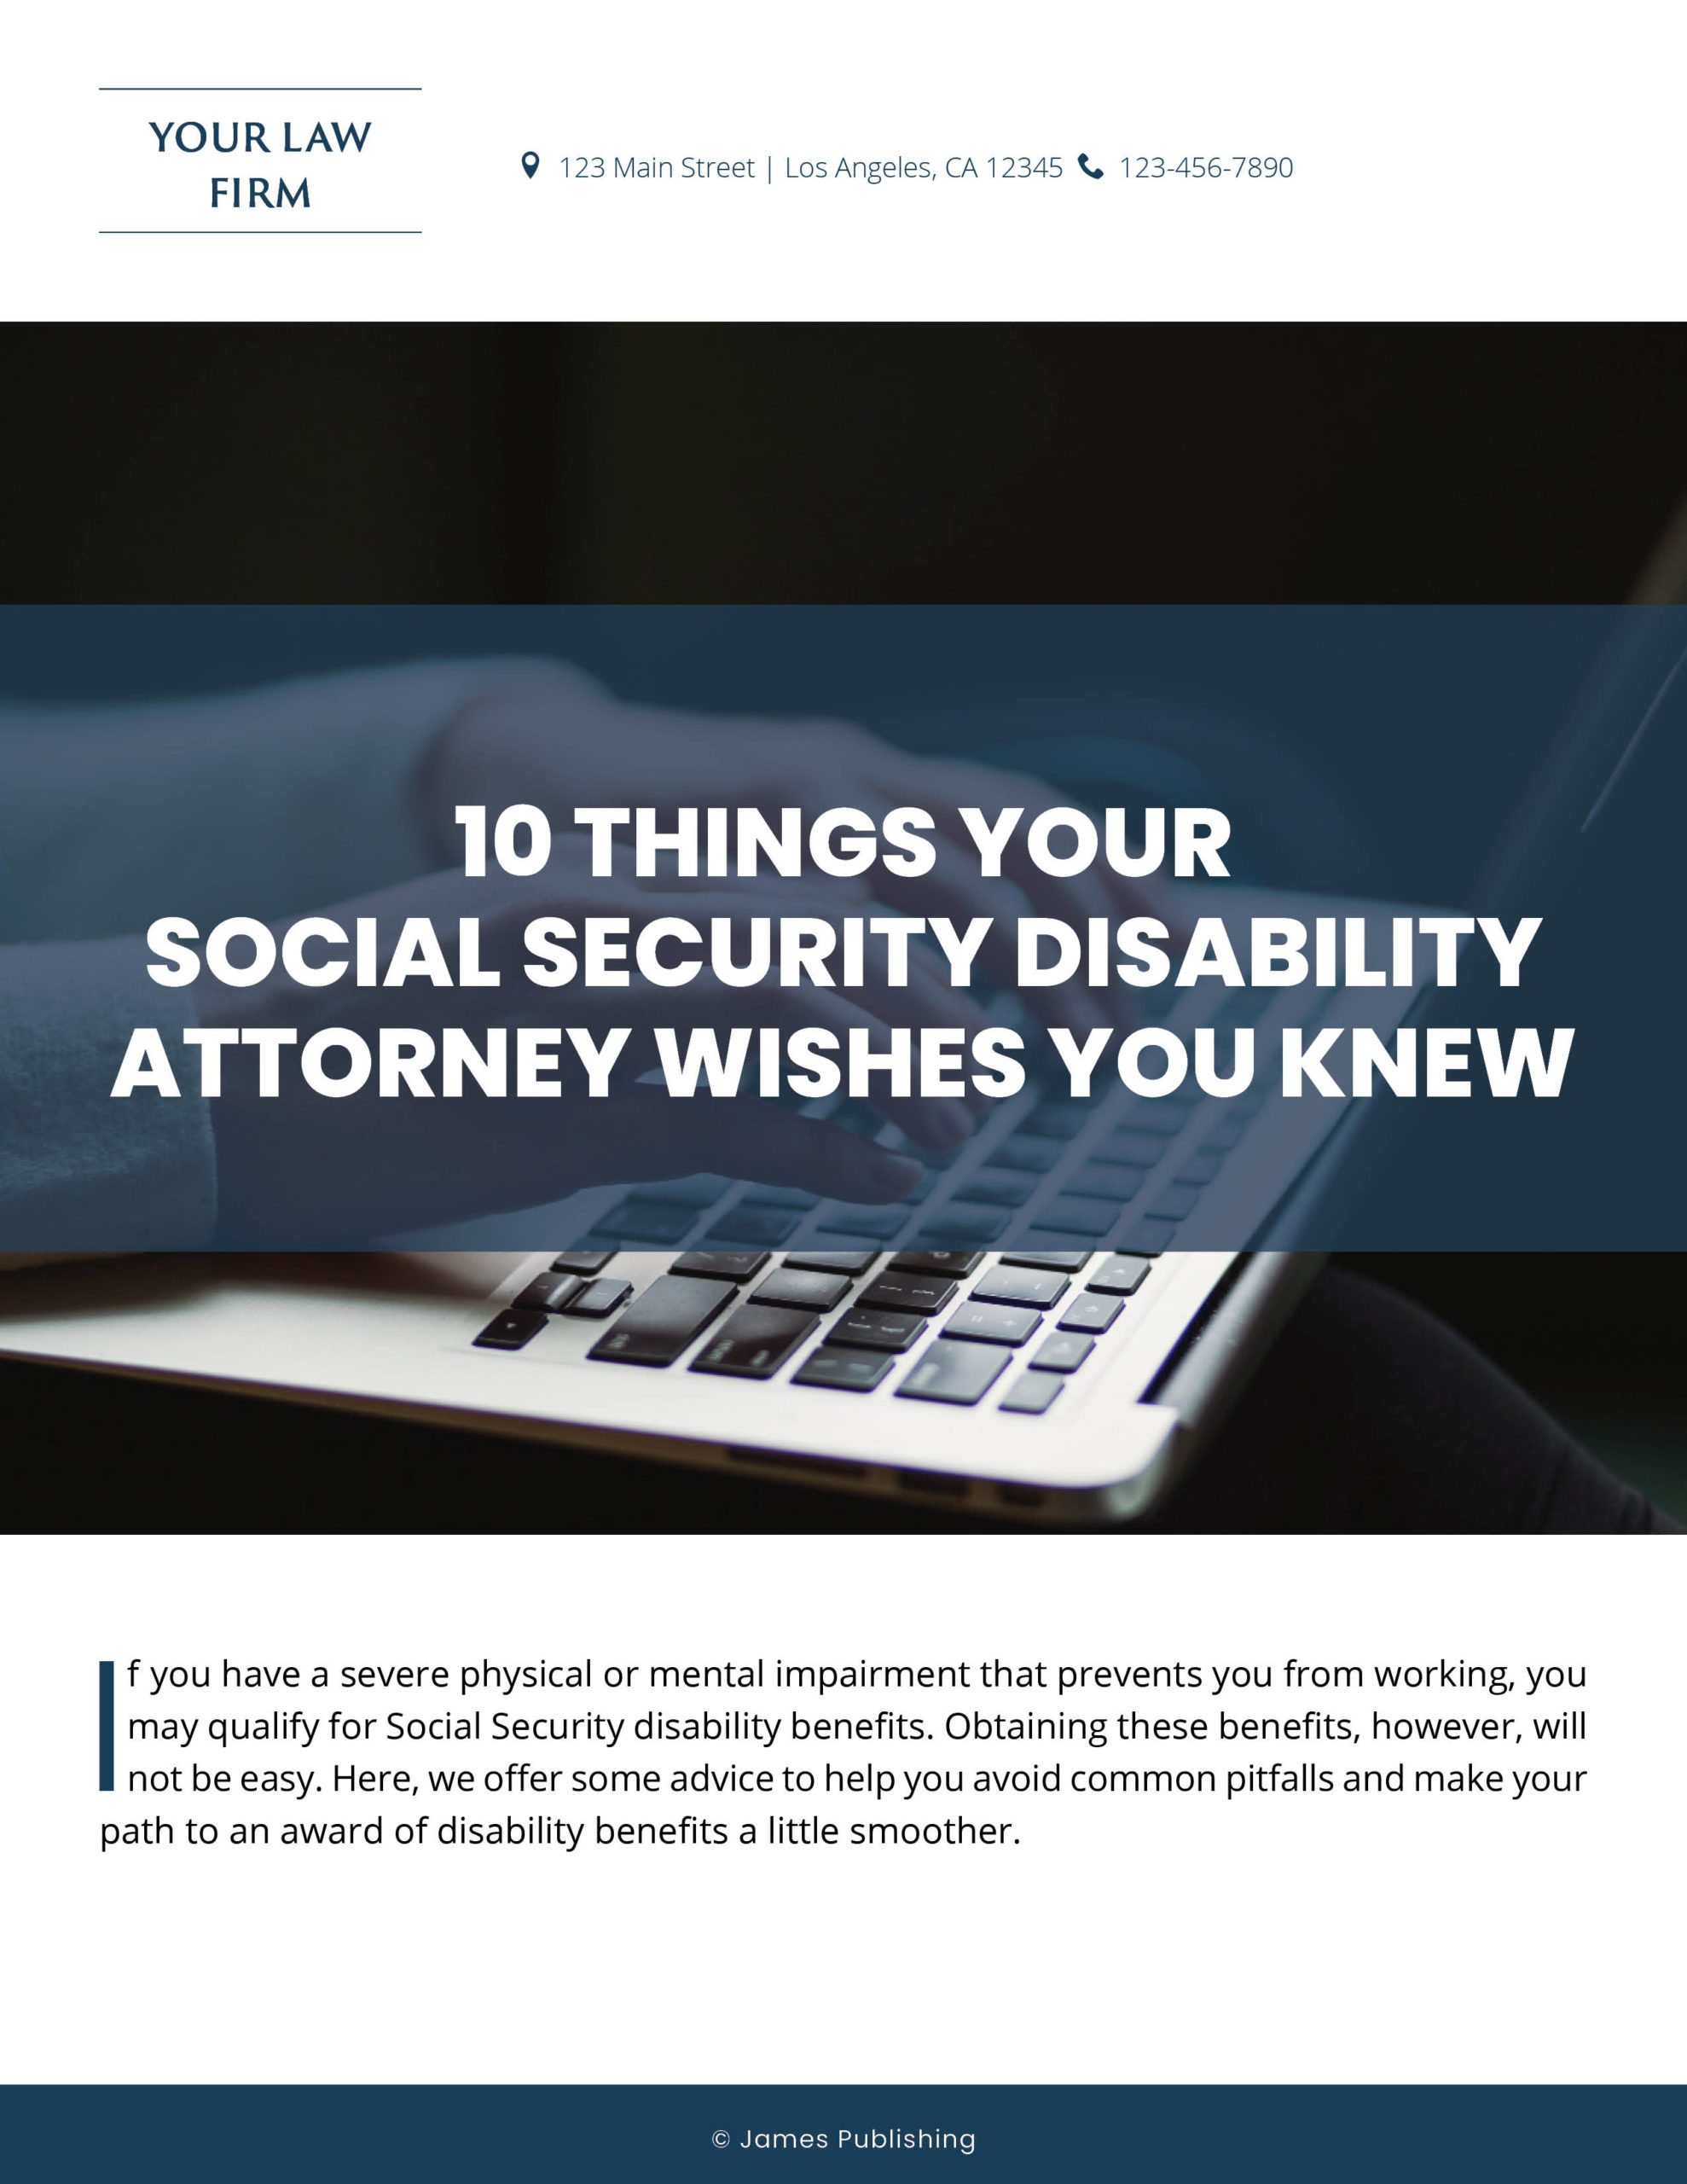 SSD-18 10 Things Your SSD Attorney Wishes You Knew